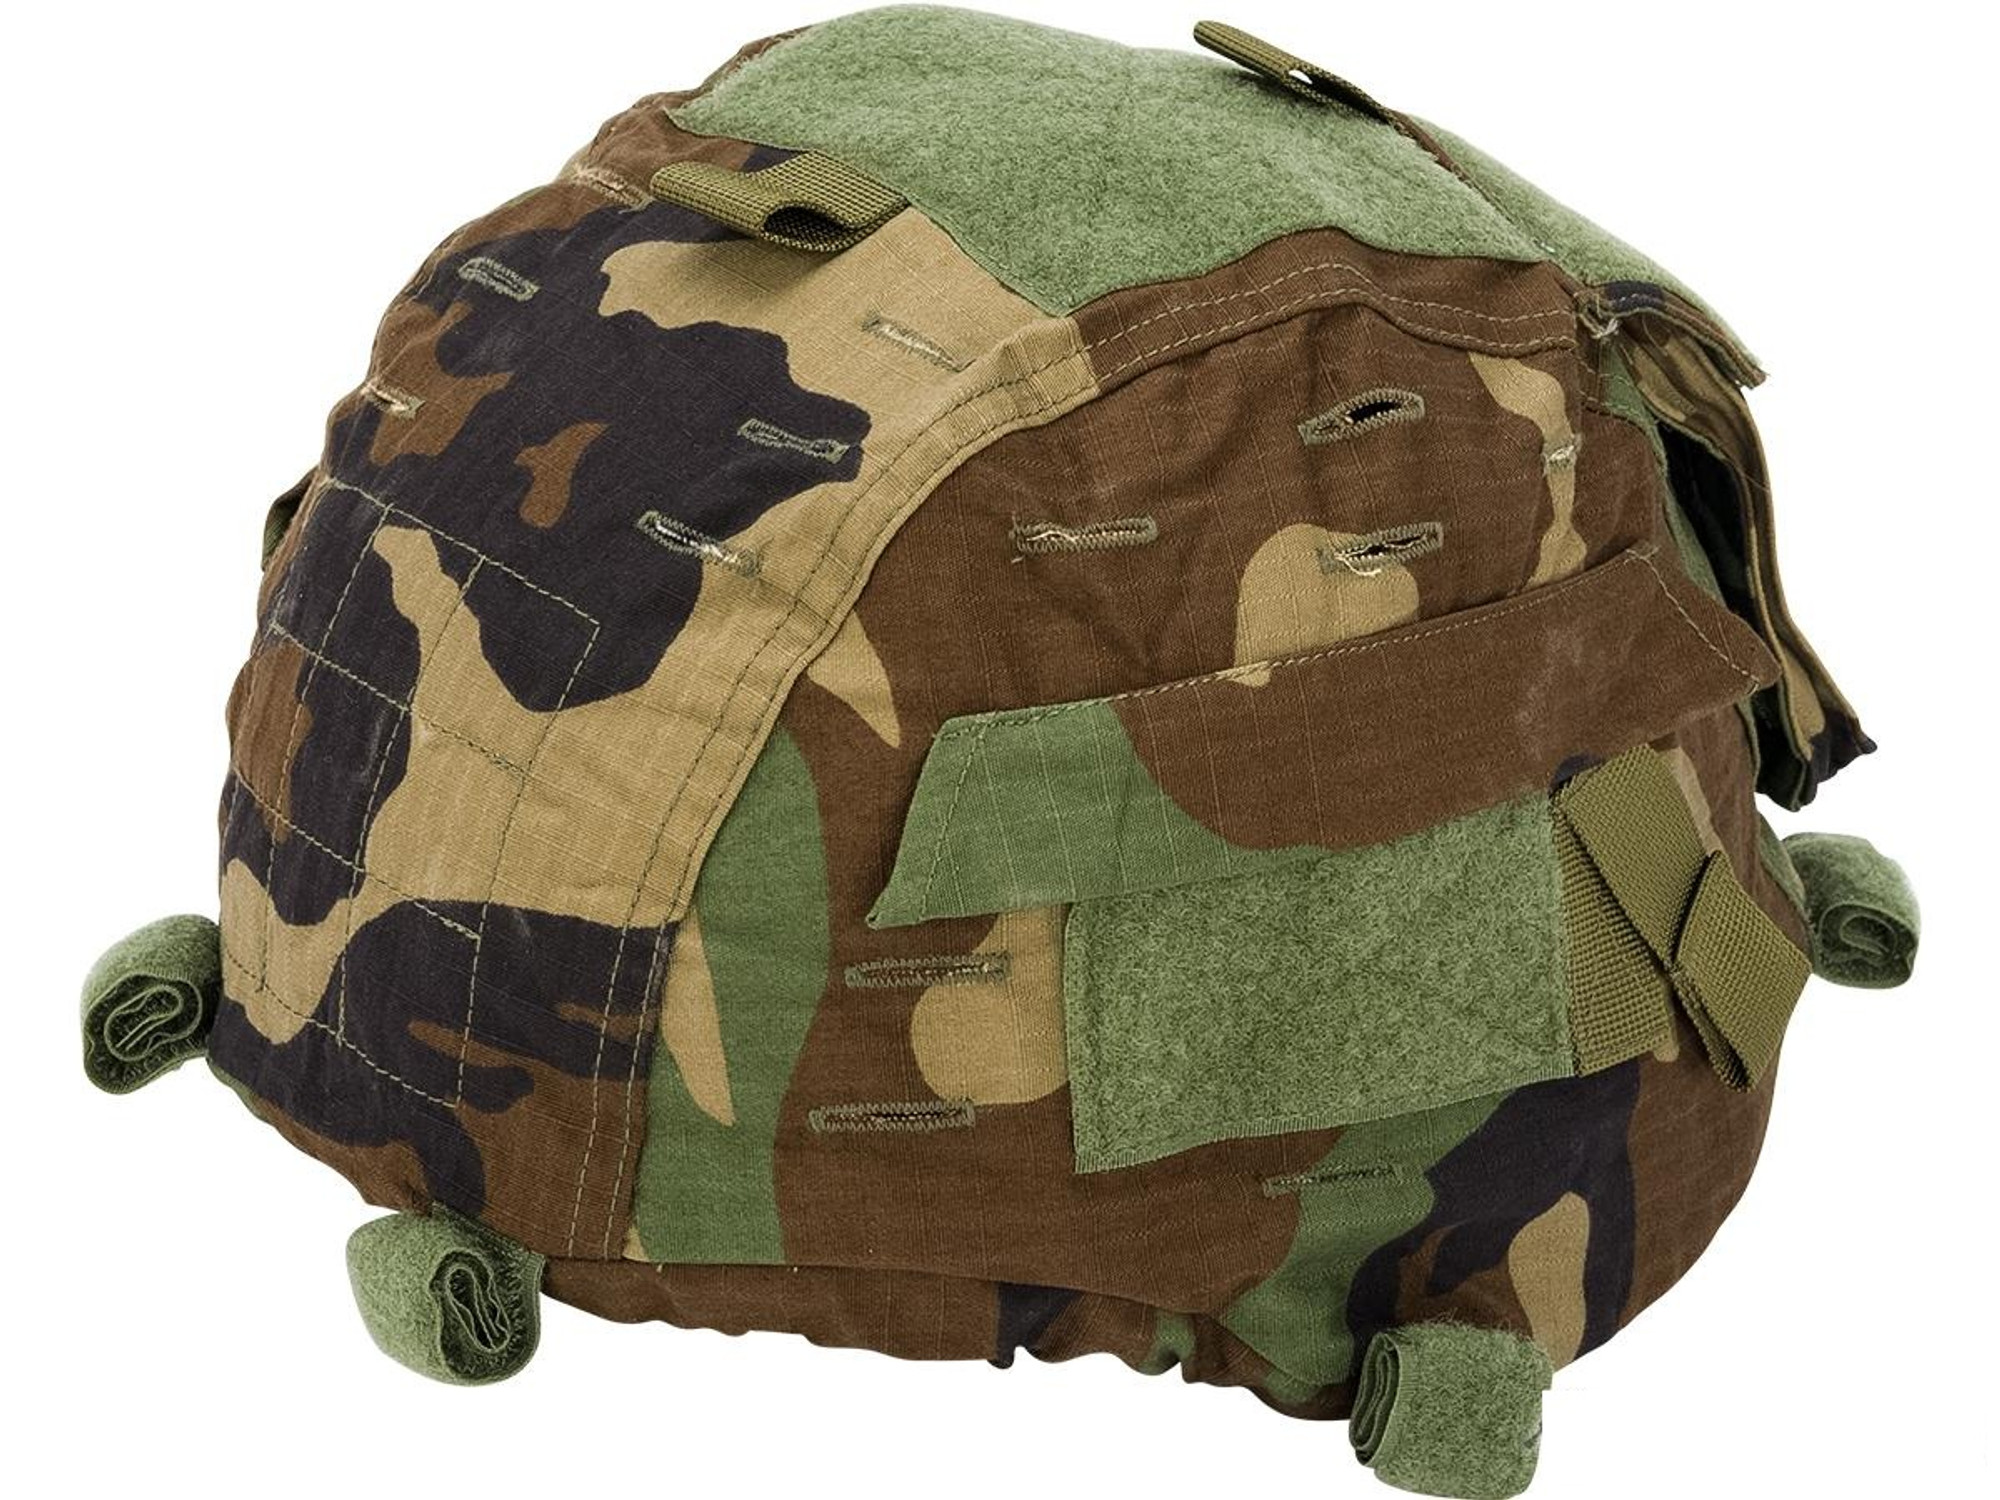 Military Style Combat Helmet Cover for MICH / ACH / TC-2000 Protective Combat Helmet Series - Woodland